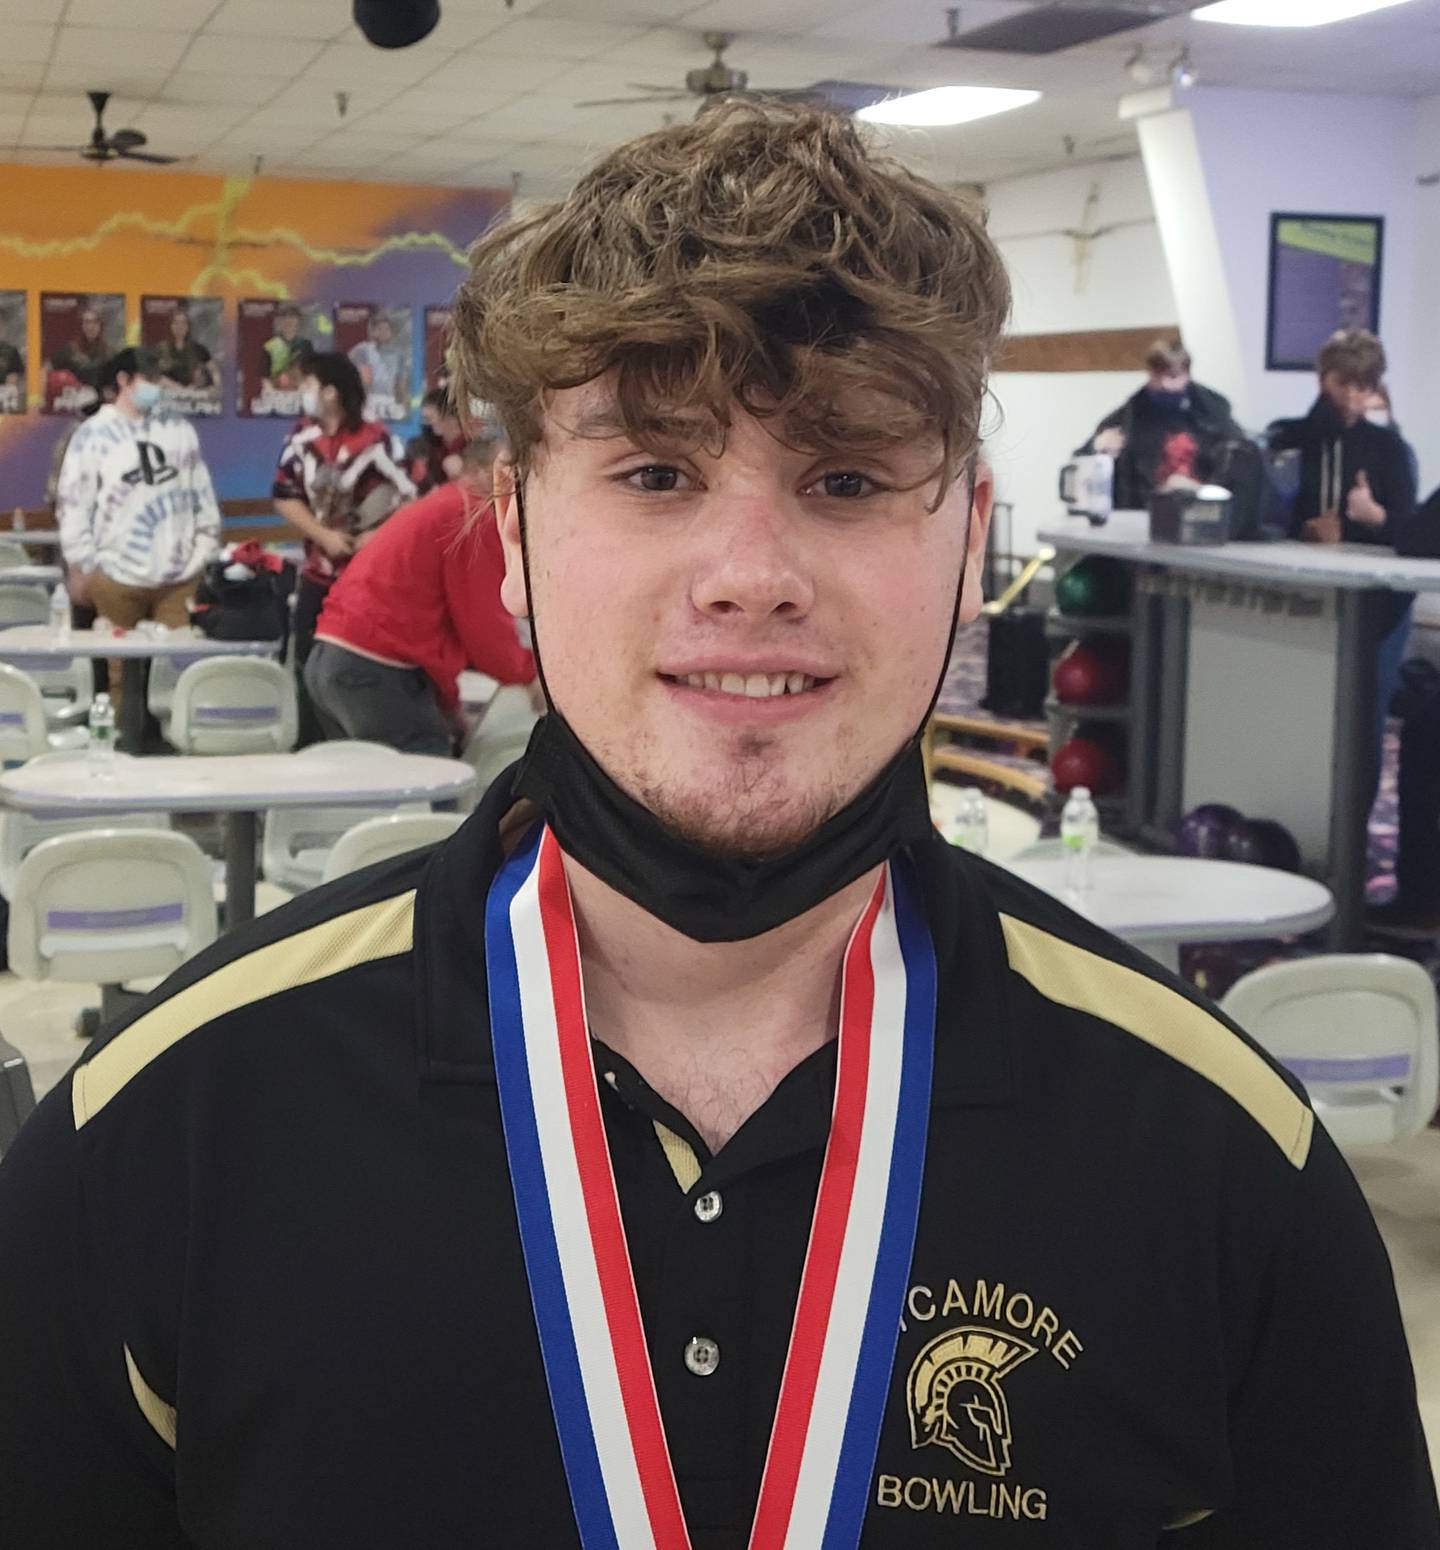 Sycamore senior Tommy Reboletti finished third and helped lead the Spartans to a second-place team finish at Tuesday's Interstate Eight Conference Boys Bowling meet held at the Illinois Valley Super Bowl in Peru.